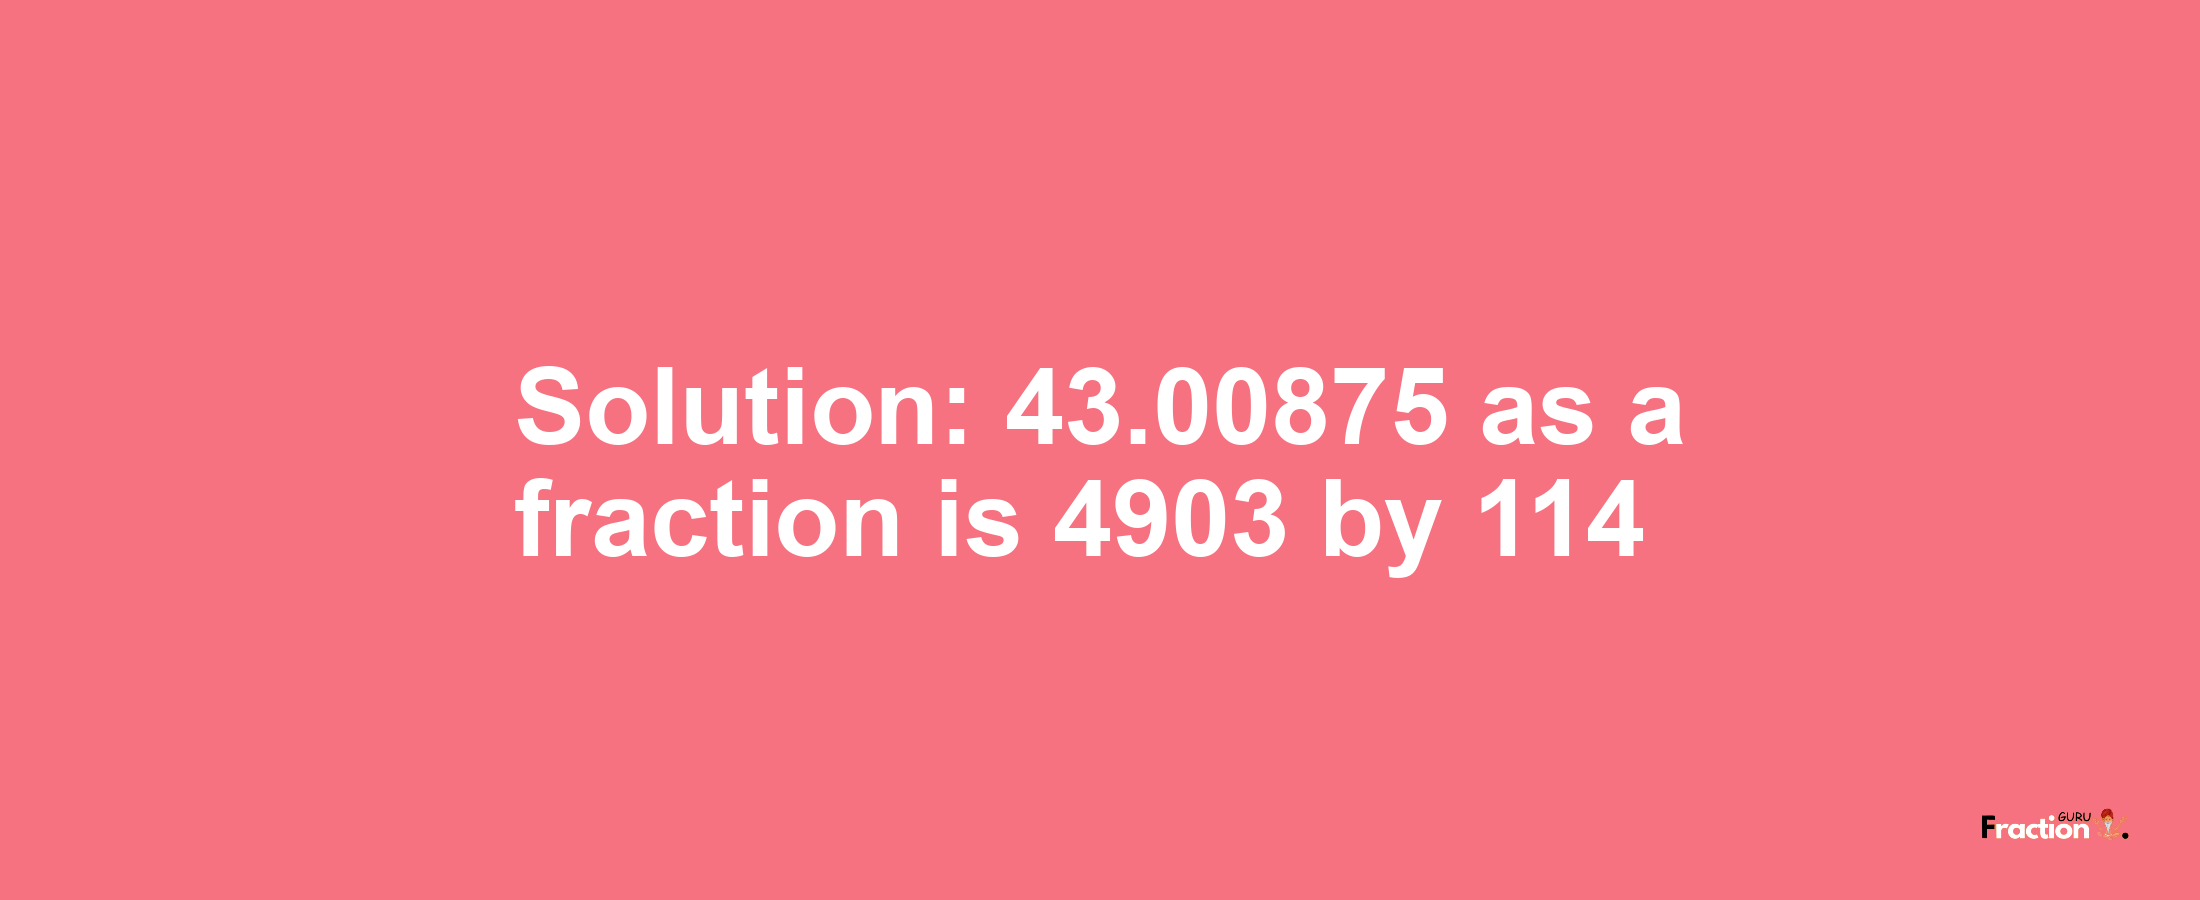 Solution:43.00875 as a fraction is 4903/114